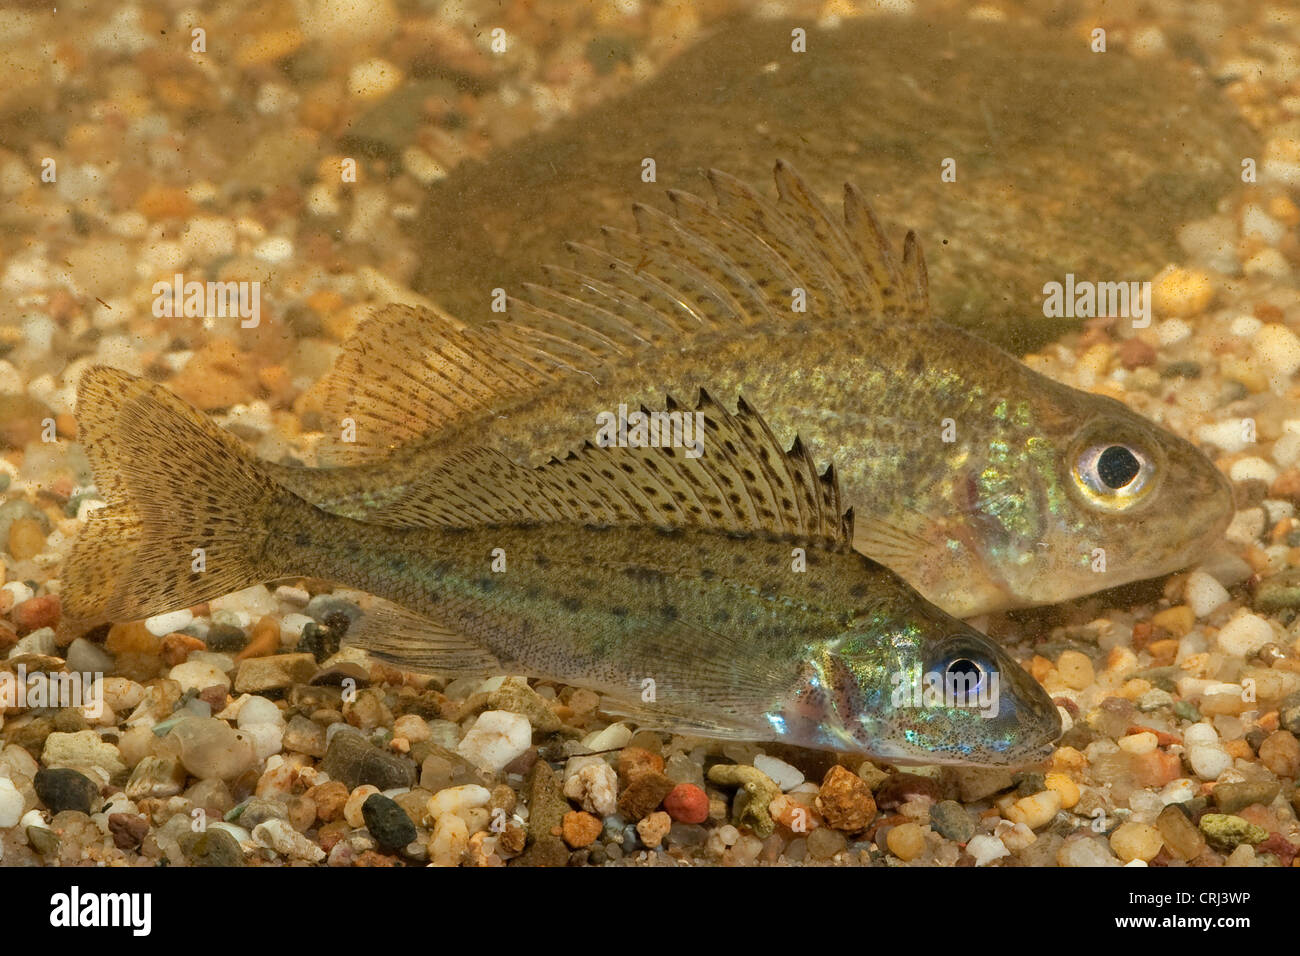 ruffe, pope (Gymnocephalus cernuus), the two species of ruffes in comparison, ruffe at the front; balon's ruffe at the back, Germany, Bavaria, Danube Stock Photo